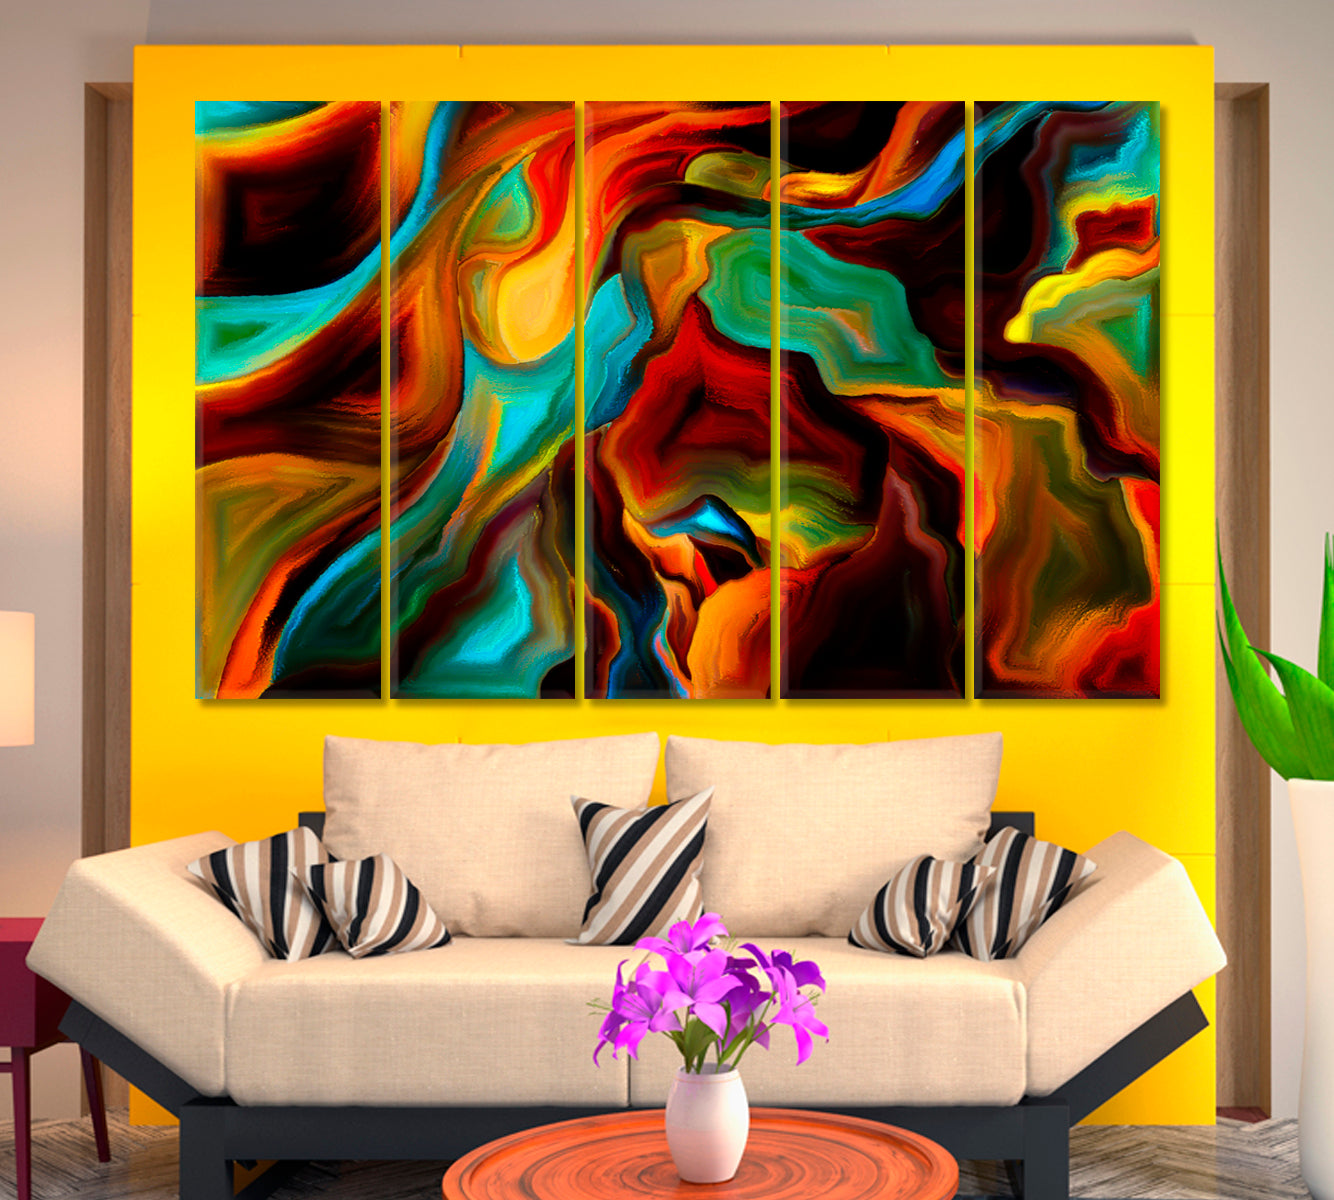 Inside Of Colors And Forms Abstract Design Abstract Art Print Artesty 5 panels 36" x 24" 